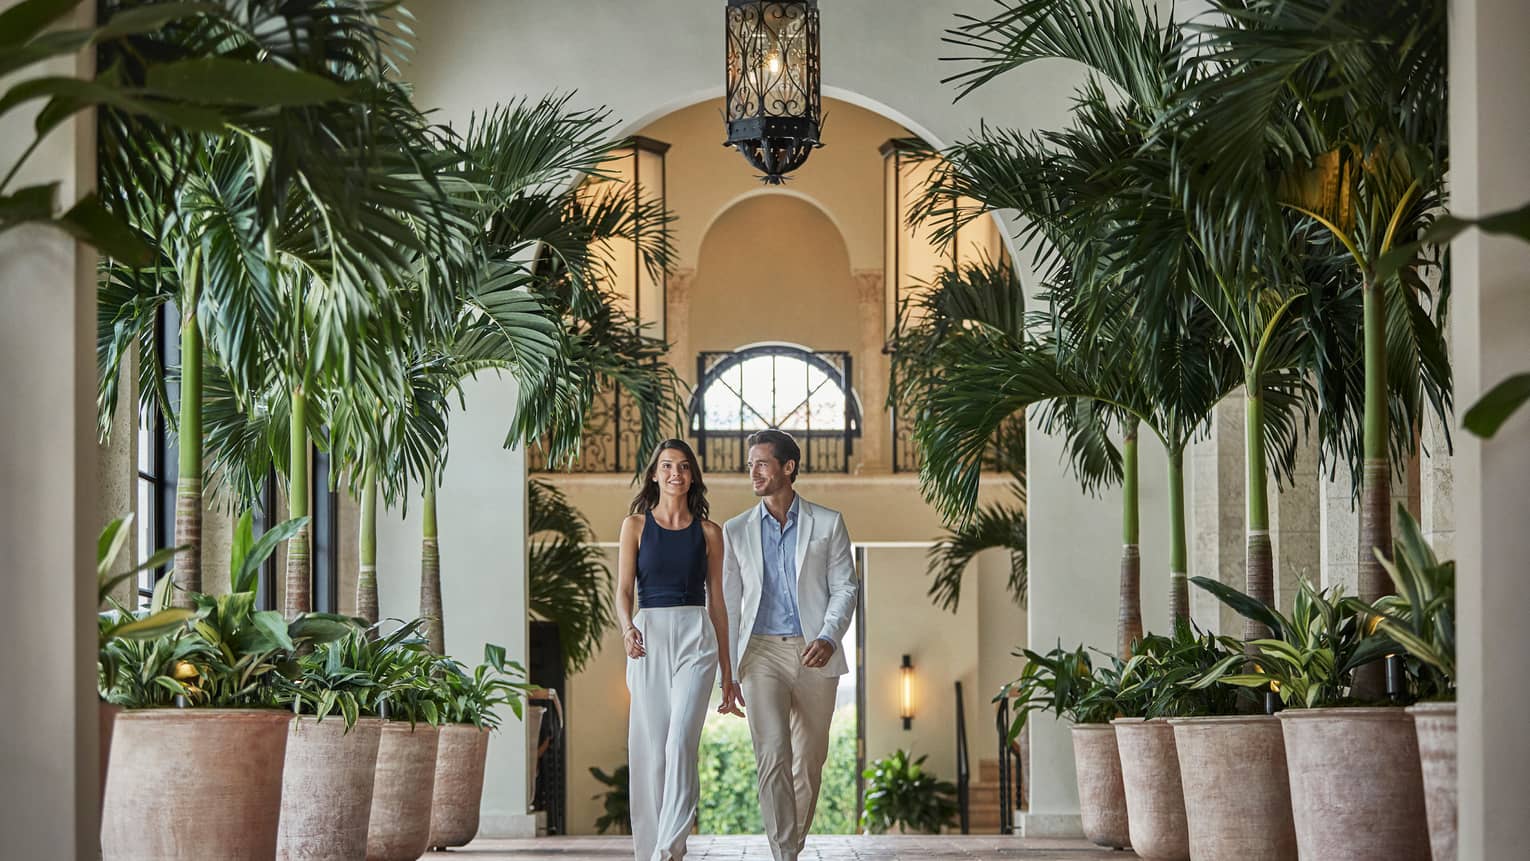 Couple walks down hallway lined with potted palm trees under arched ceiling